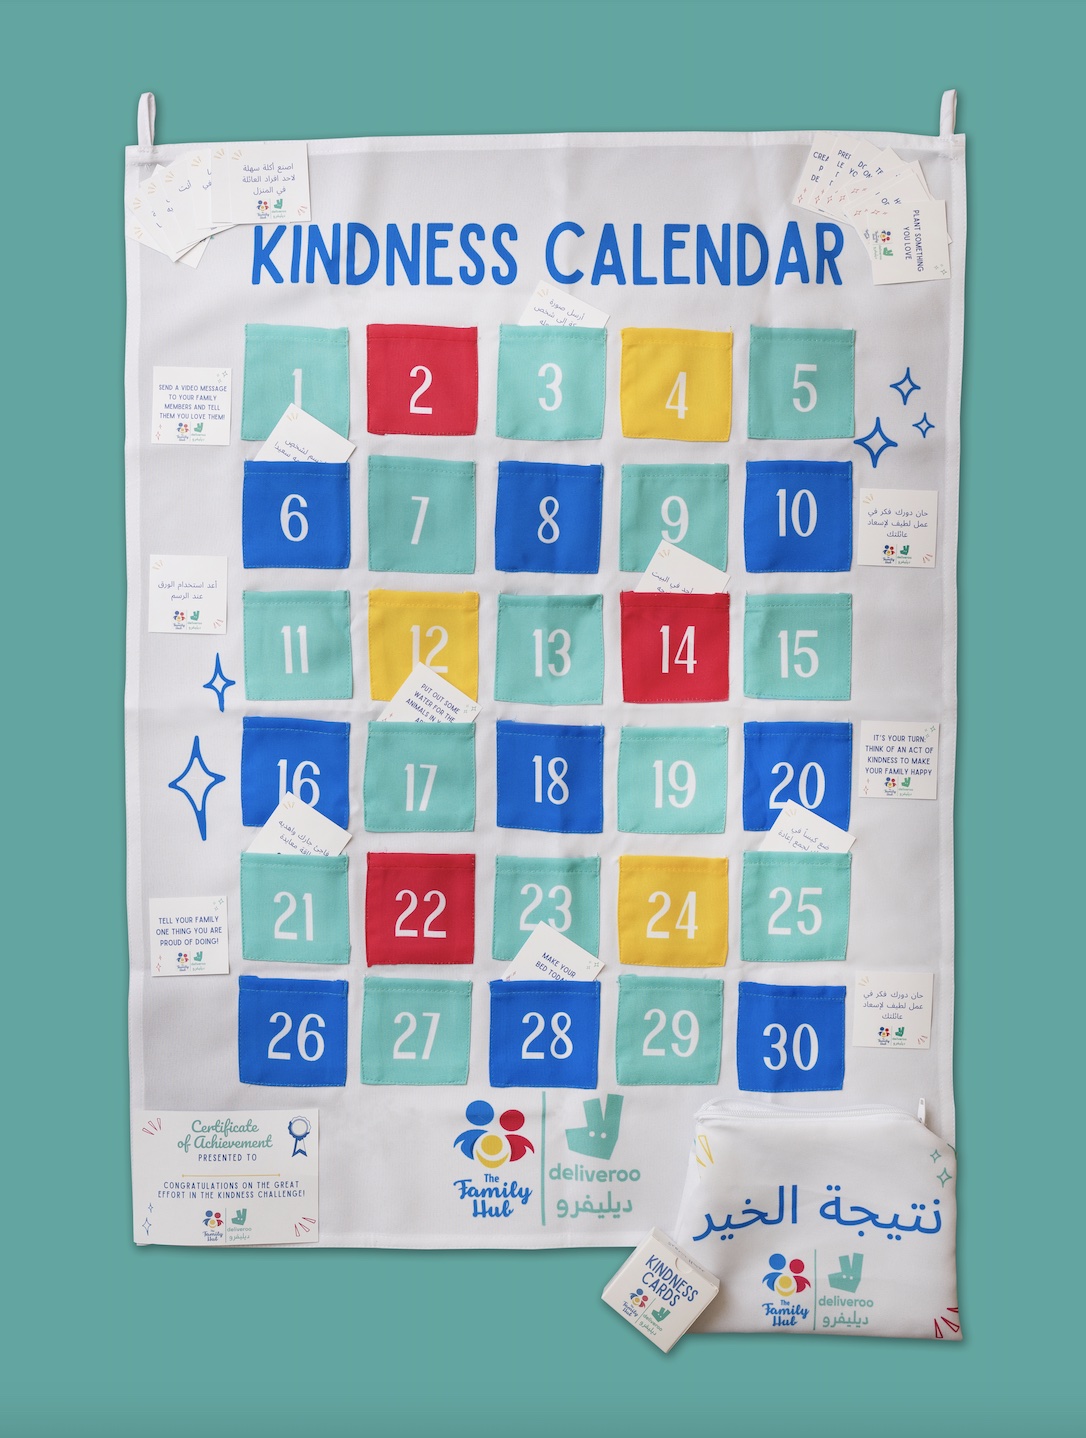 Deliveroo Partners With The Family Hub to Launch Kindness Calendar